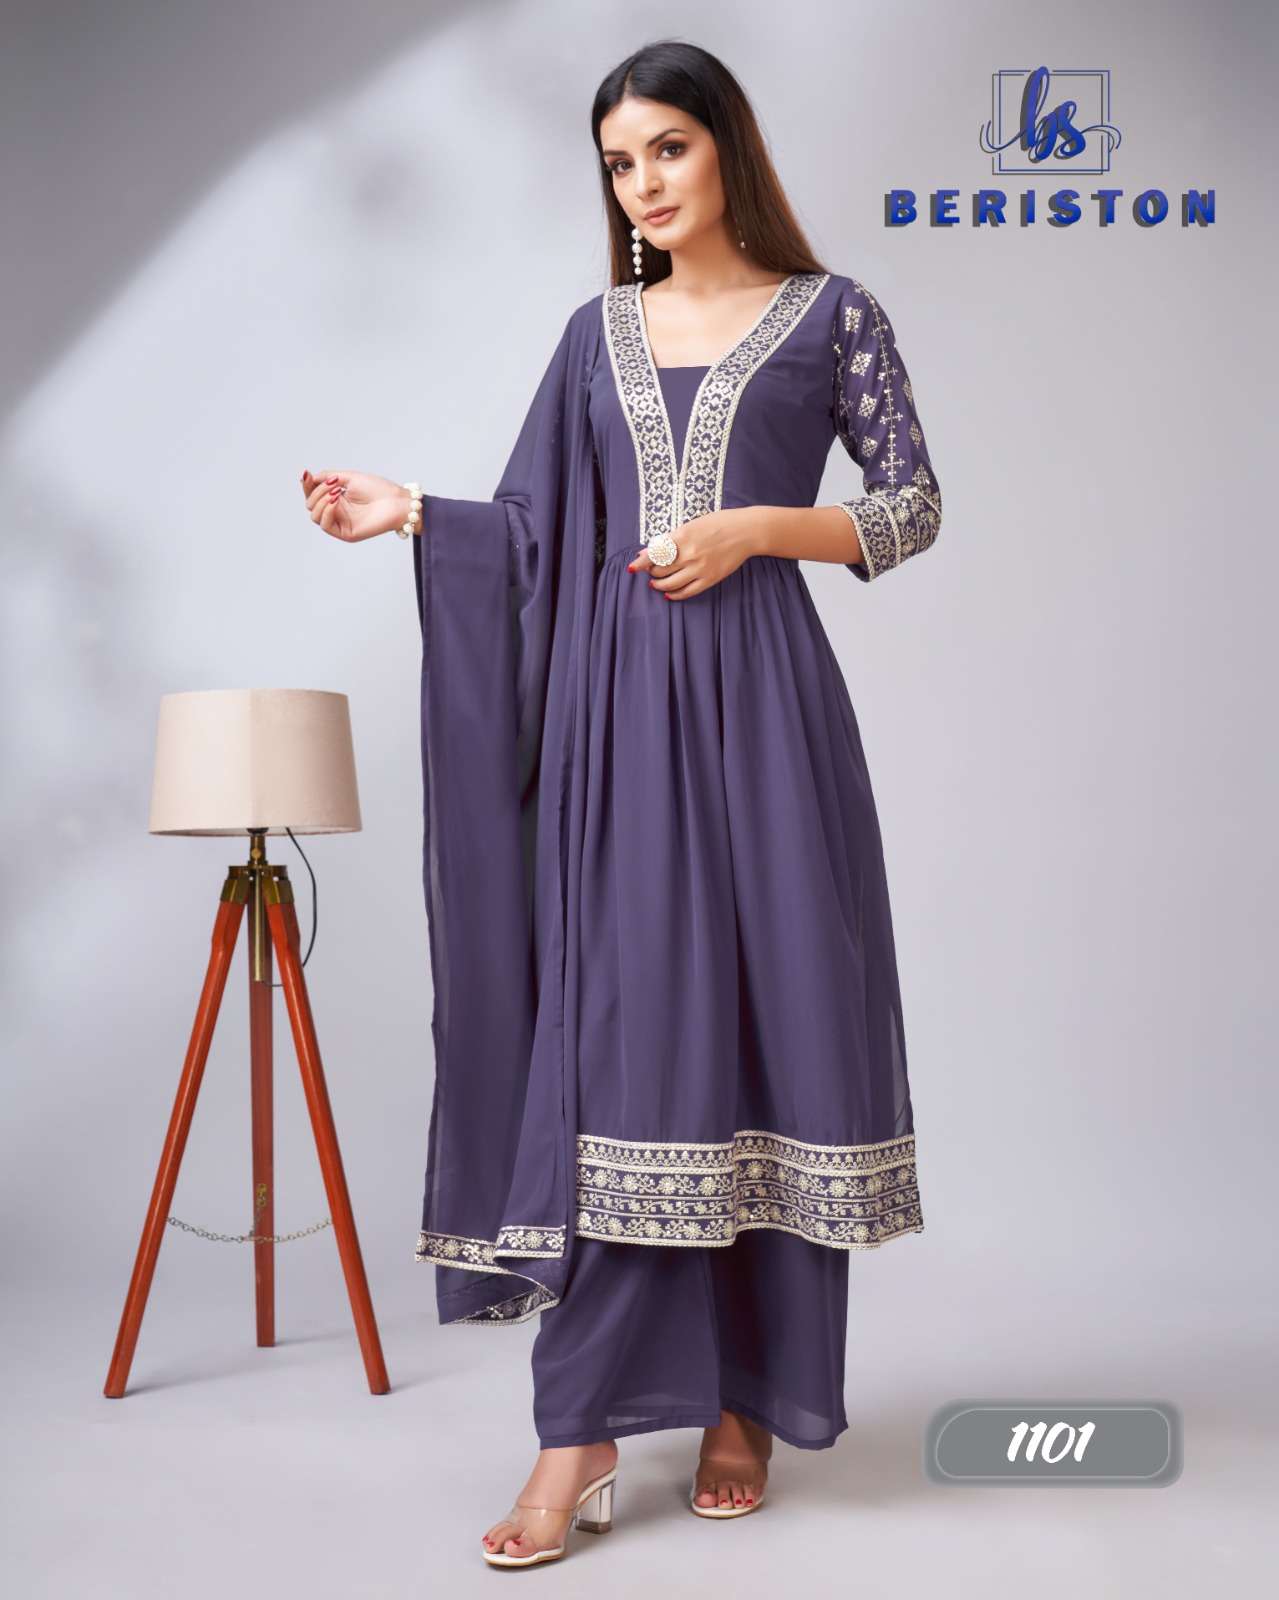 beriston our new brand readymade salwar suits  kurtis catalog name bs vol 11 fabric details top georgette with  shifali embroidery work plazzo georgette dupatta georgette work multi sequnce work  